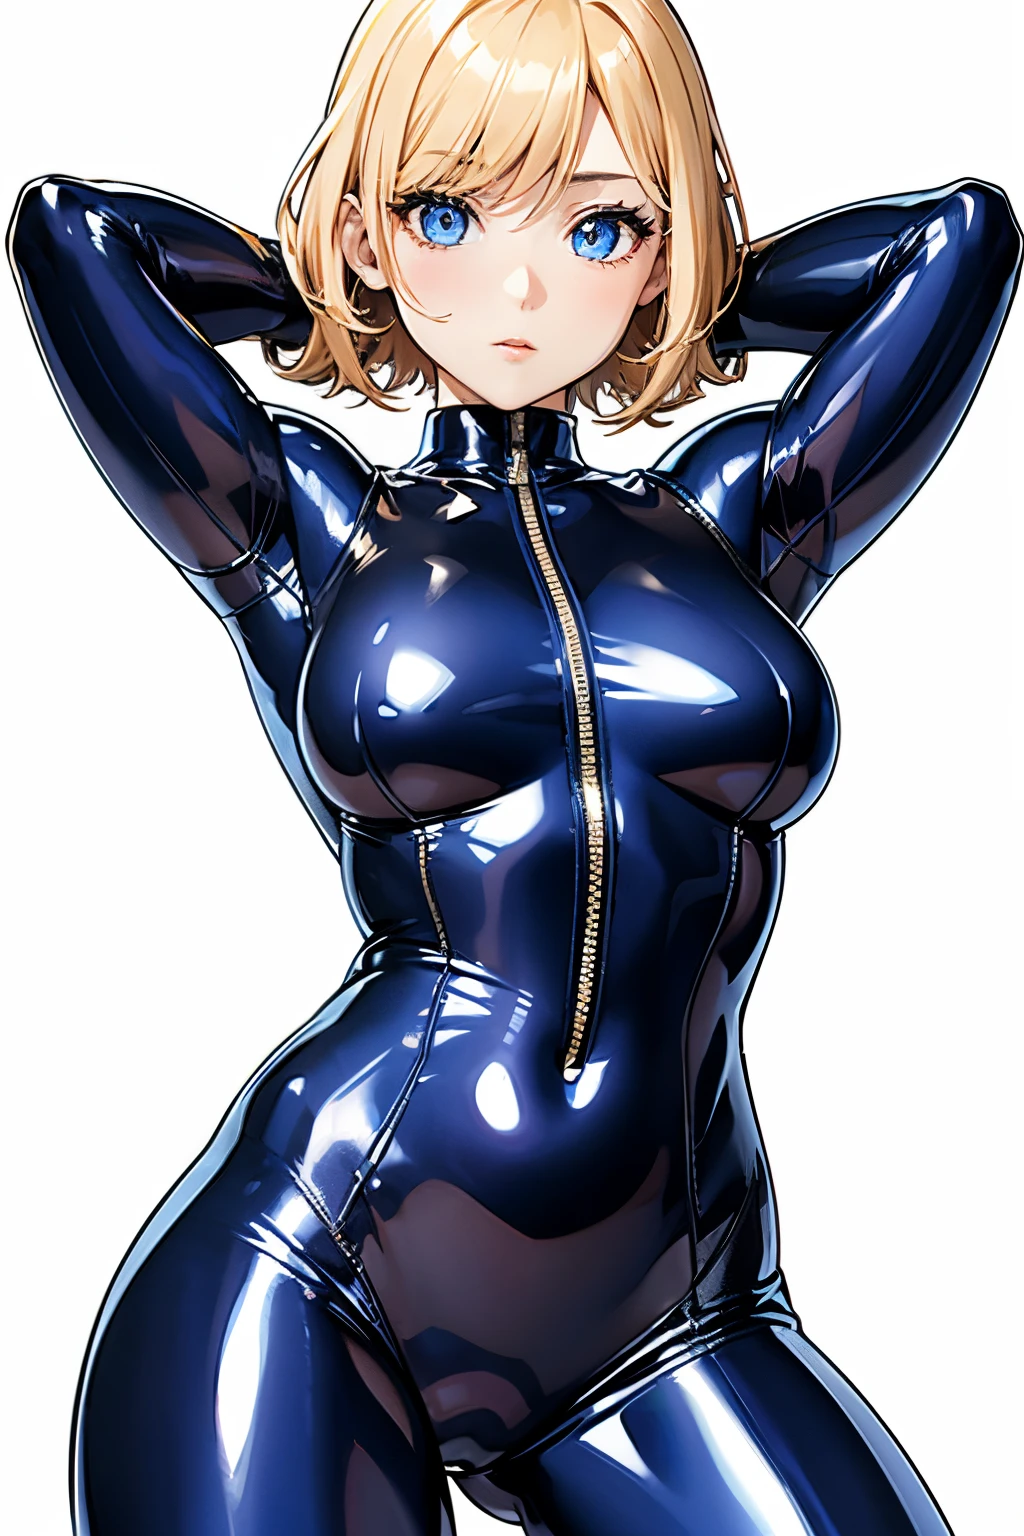 in 8K、glossy latex suit、(((Transparent latex suit)))、(((Transparent latex suit)))、short golden hair with arms behind head、Beautiful woman with blue eyes、Latex suit that shows off your body line beautifully、Upper body only